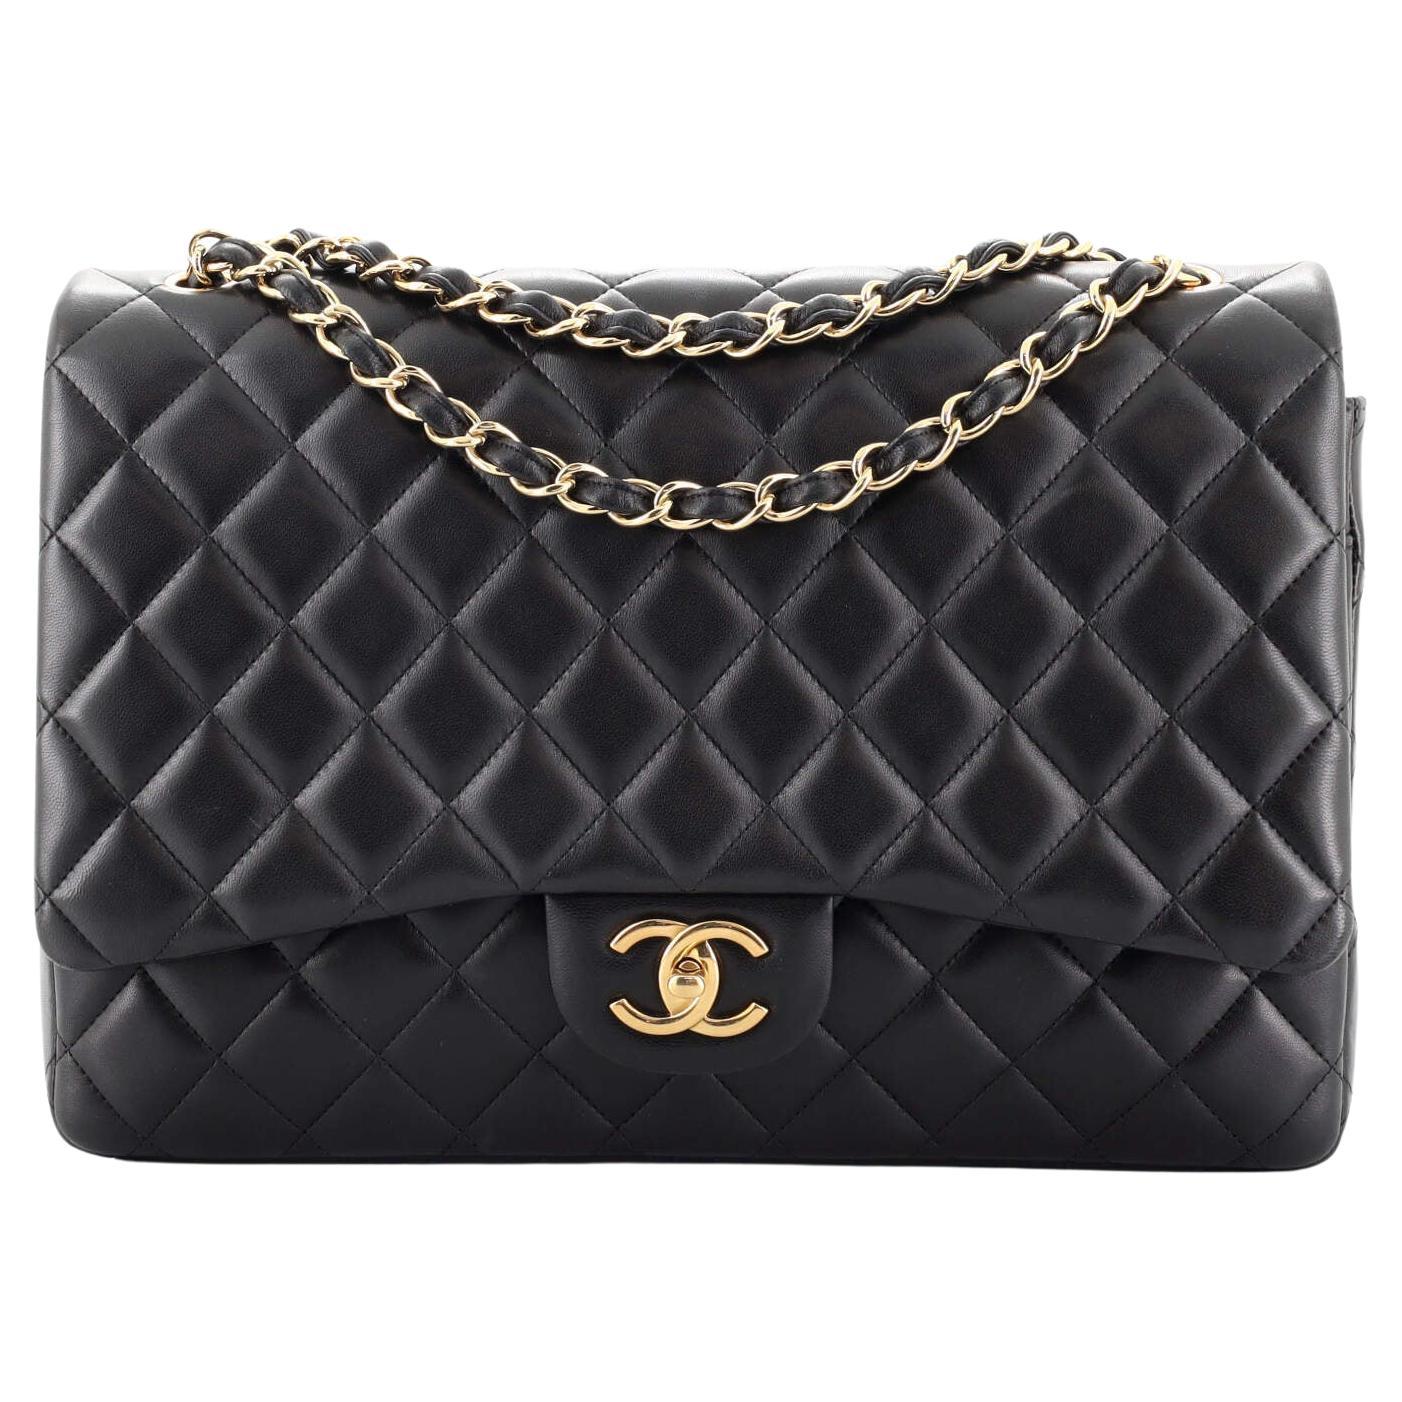 Elegance Redefined: Chanel Lambskin Quilted Maxi Flap Bag